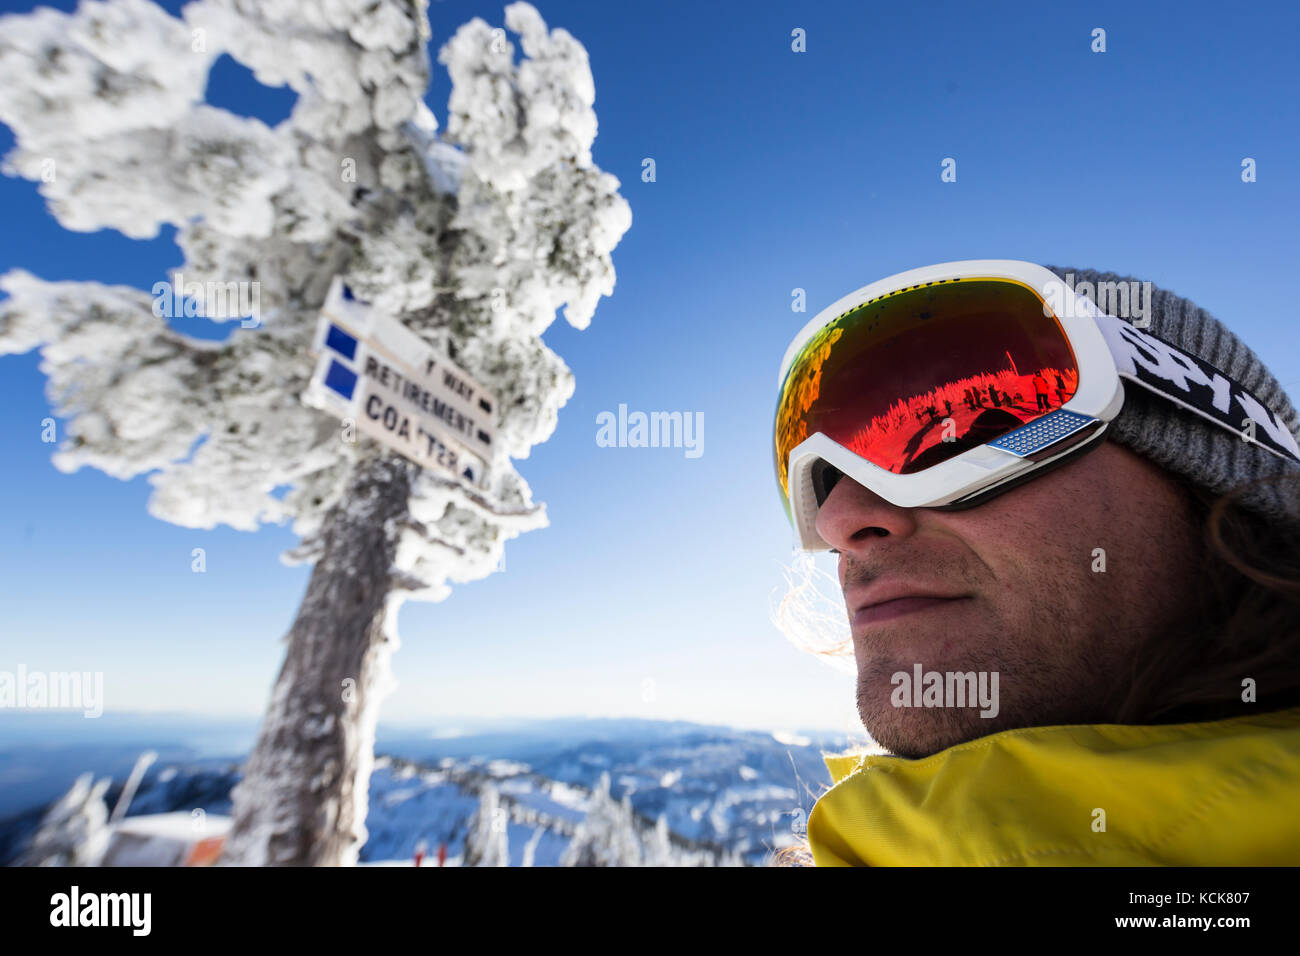 Reflections in the goggles of a snowboarder confirm a clear 'blue bird' day of skiing at Mt. Washington, The Comox Valley, Vancouver Island, British Columbia, Canada Stock Photo